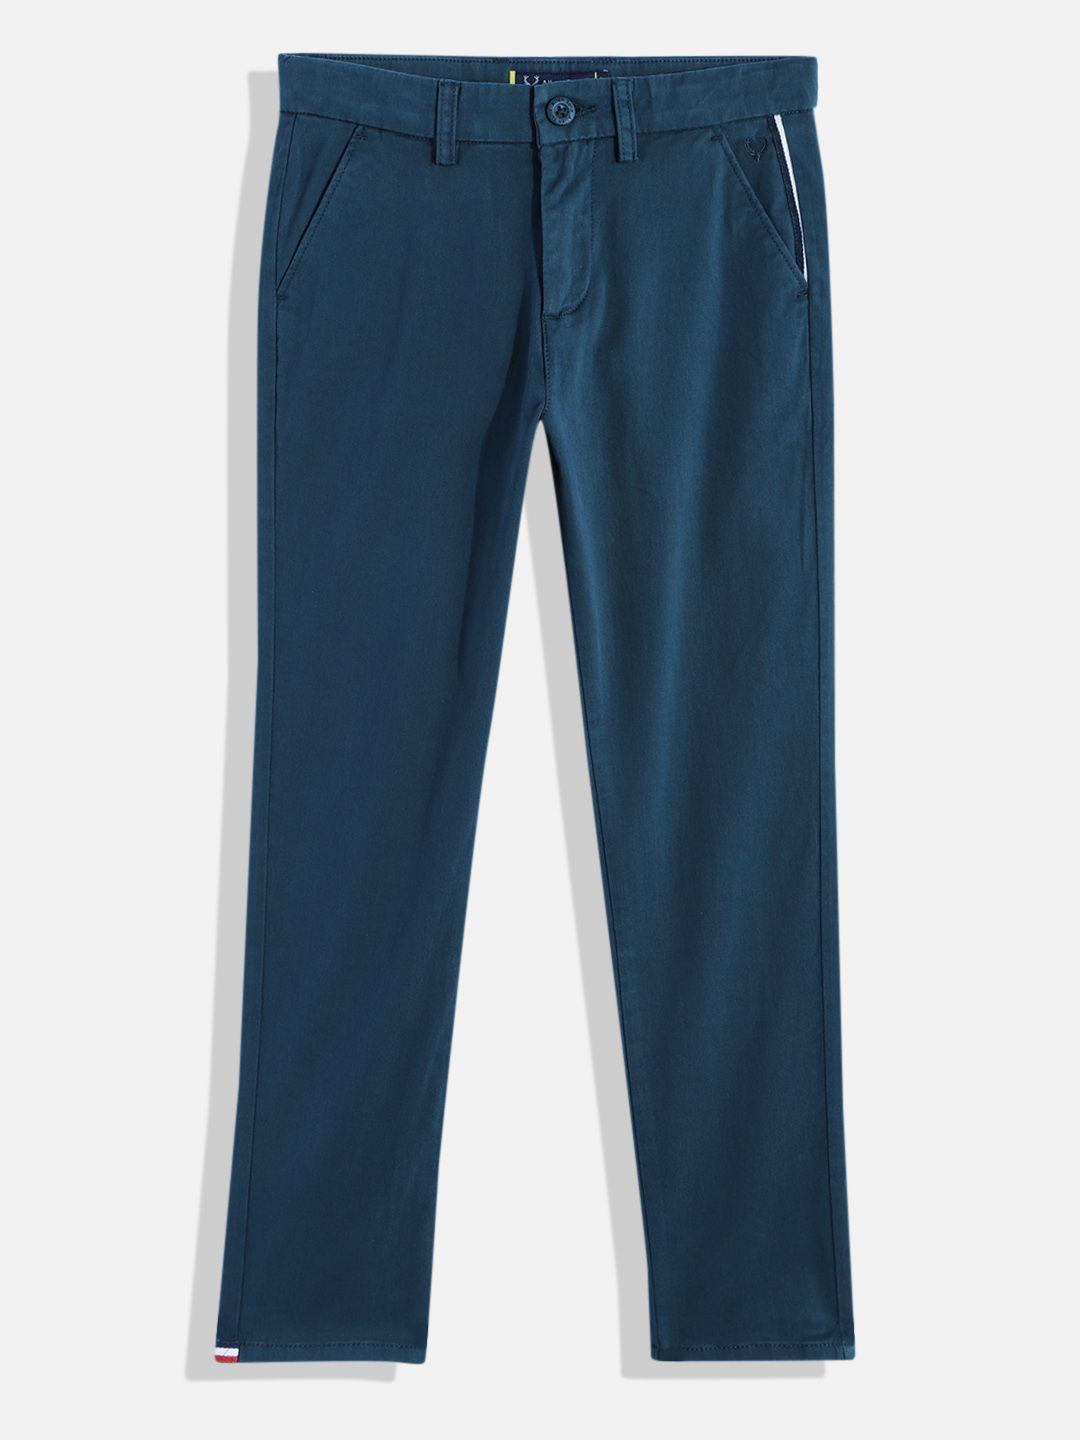 allen solly junior boys teal blue solid classic slim fit trousers